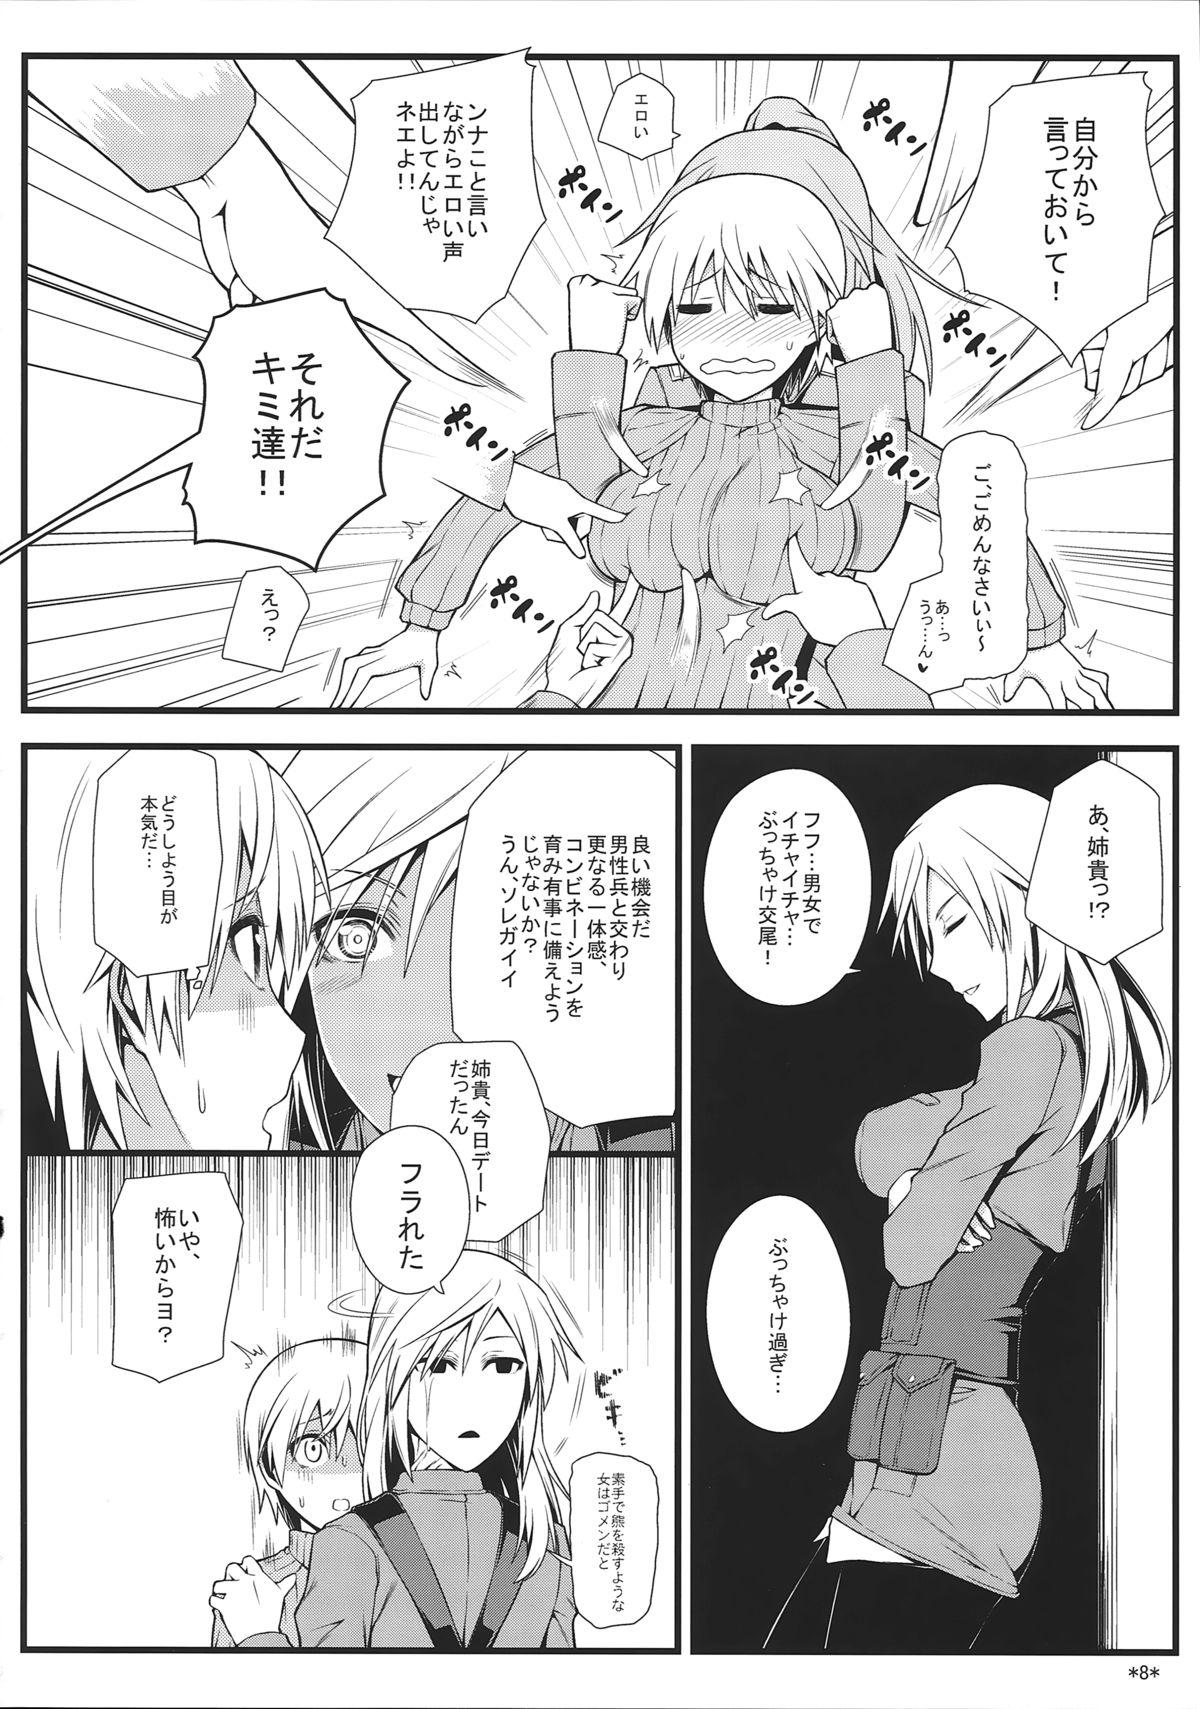 Mmf KARLSLAND SYNDROME 3 - Strike witches Crazy - Page 10